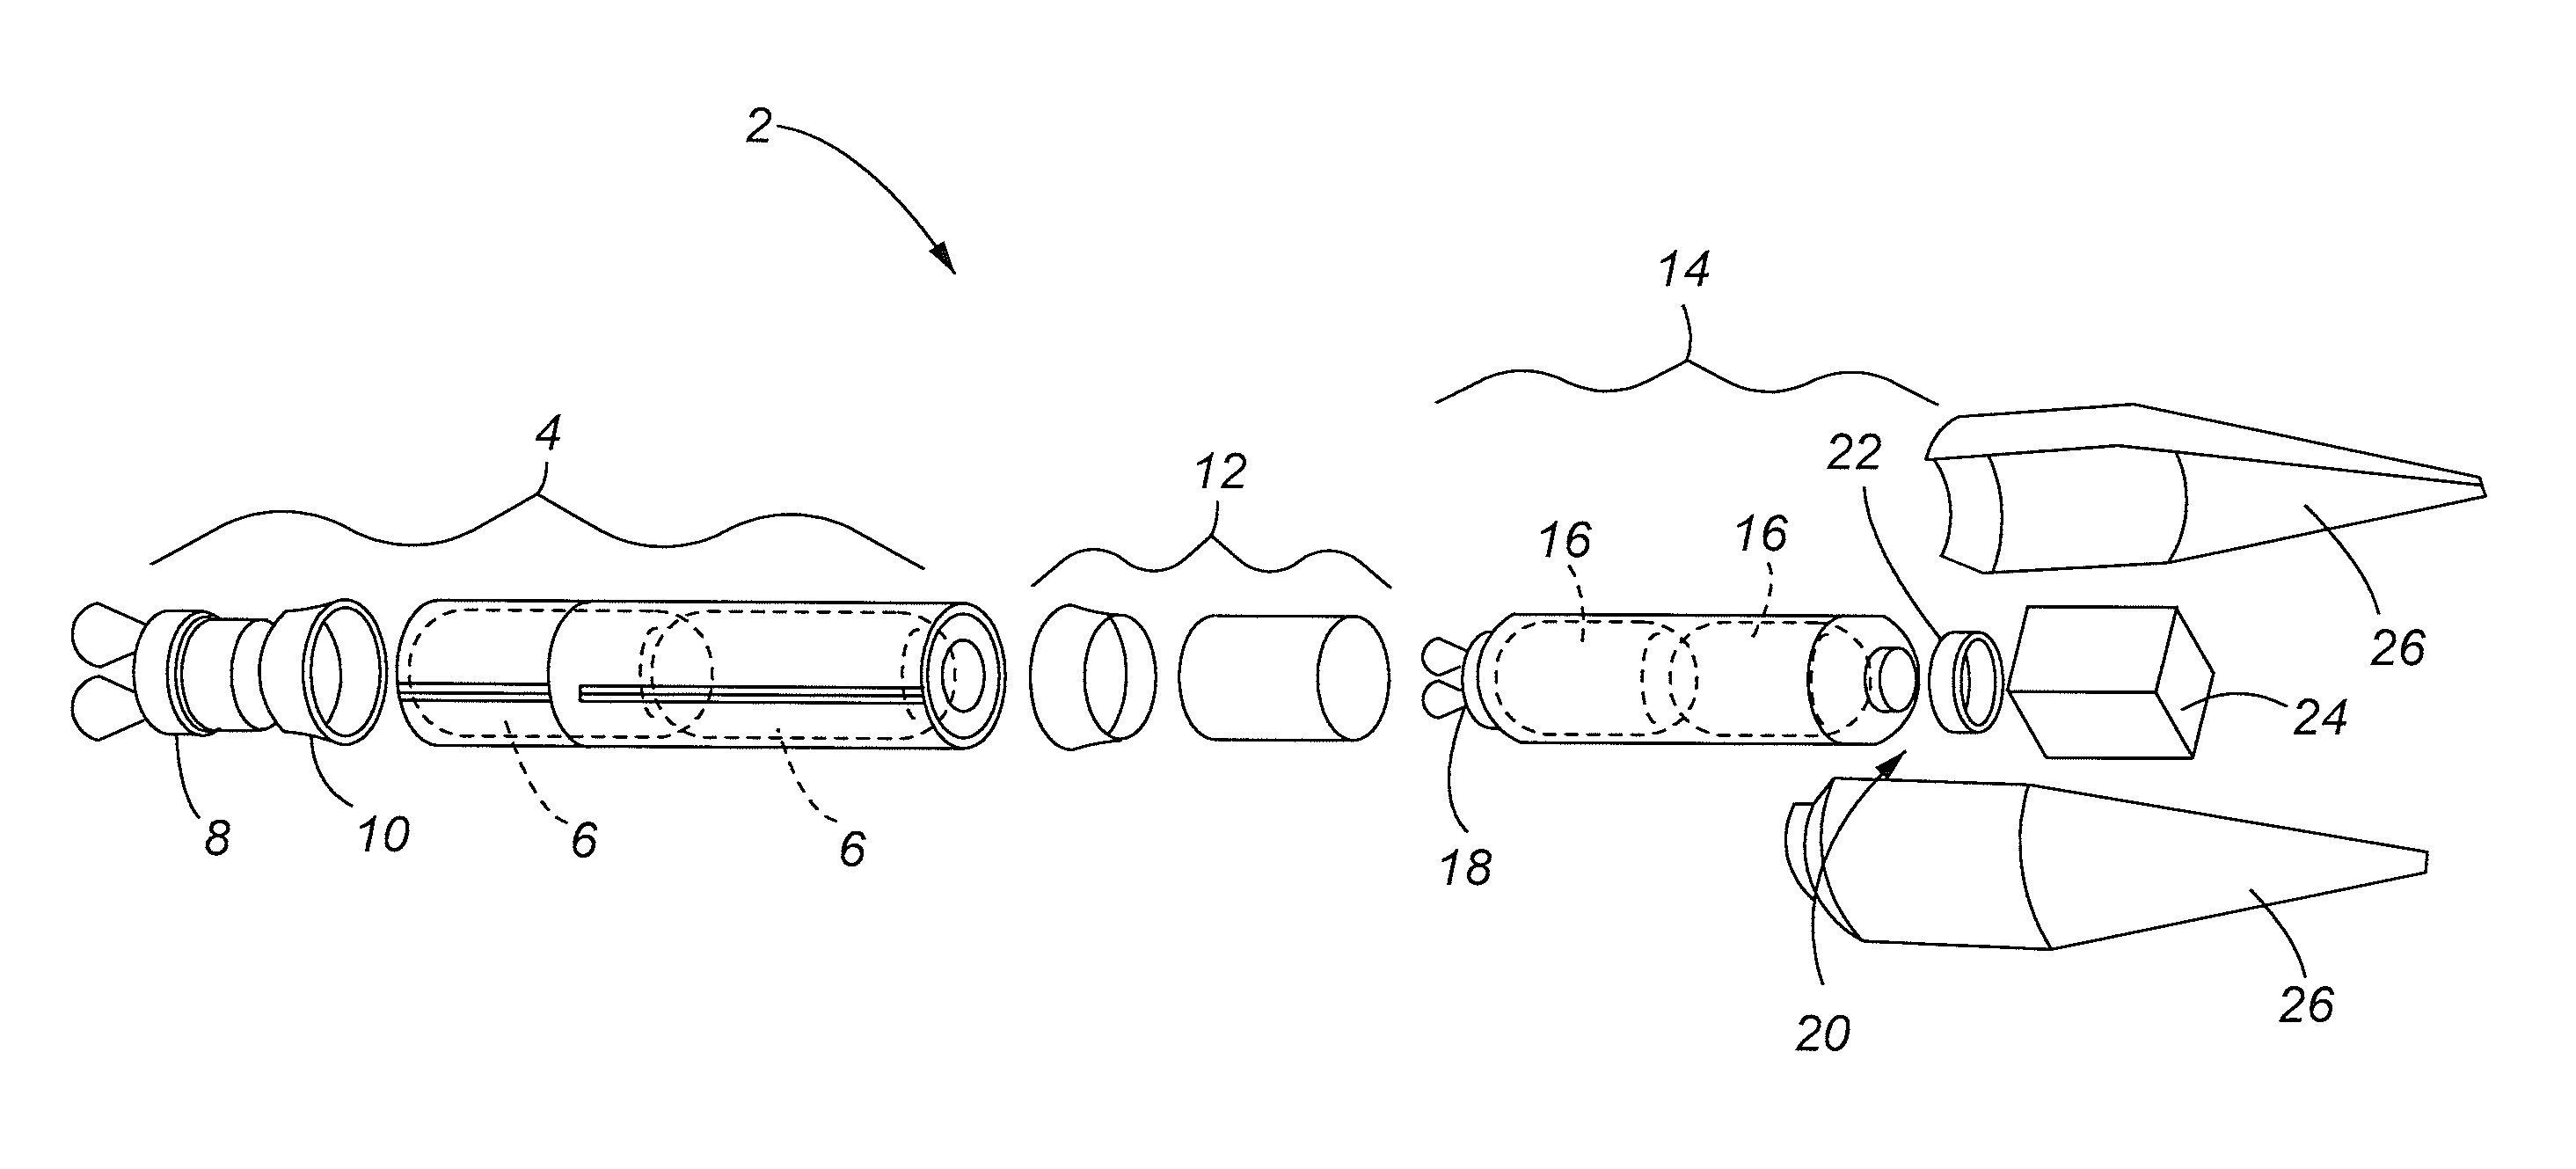 Apparatus and method of transferring and utilizing residual fuel of a launch vehicle upper stage